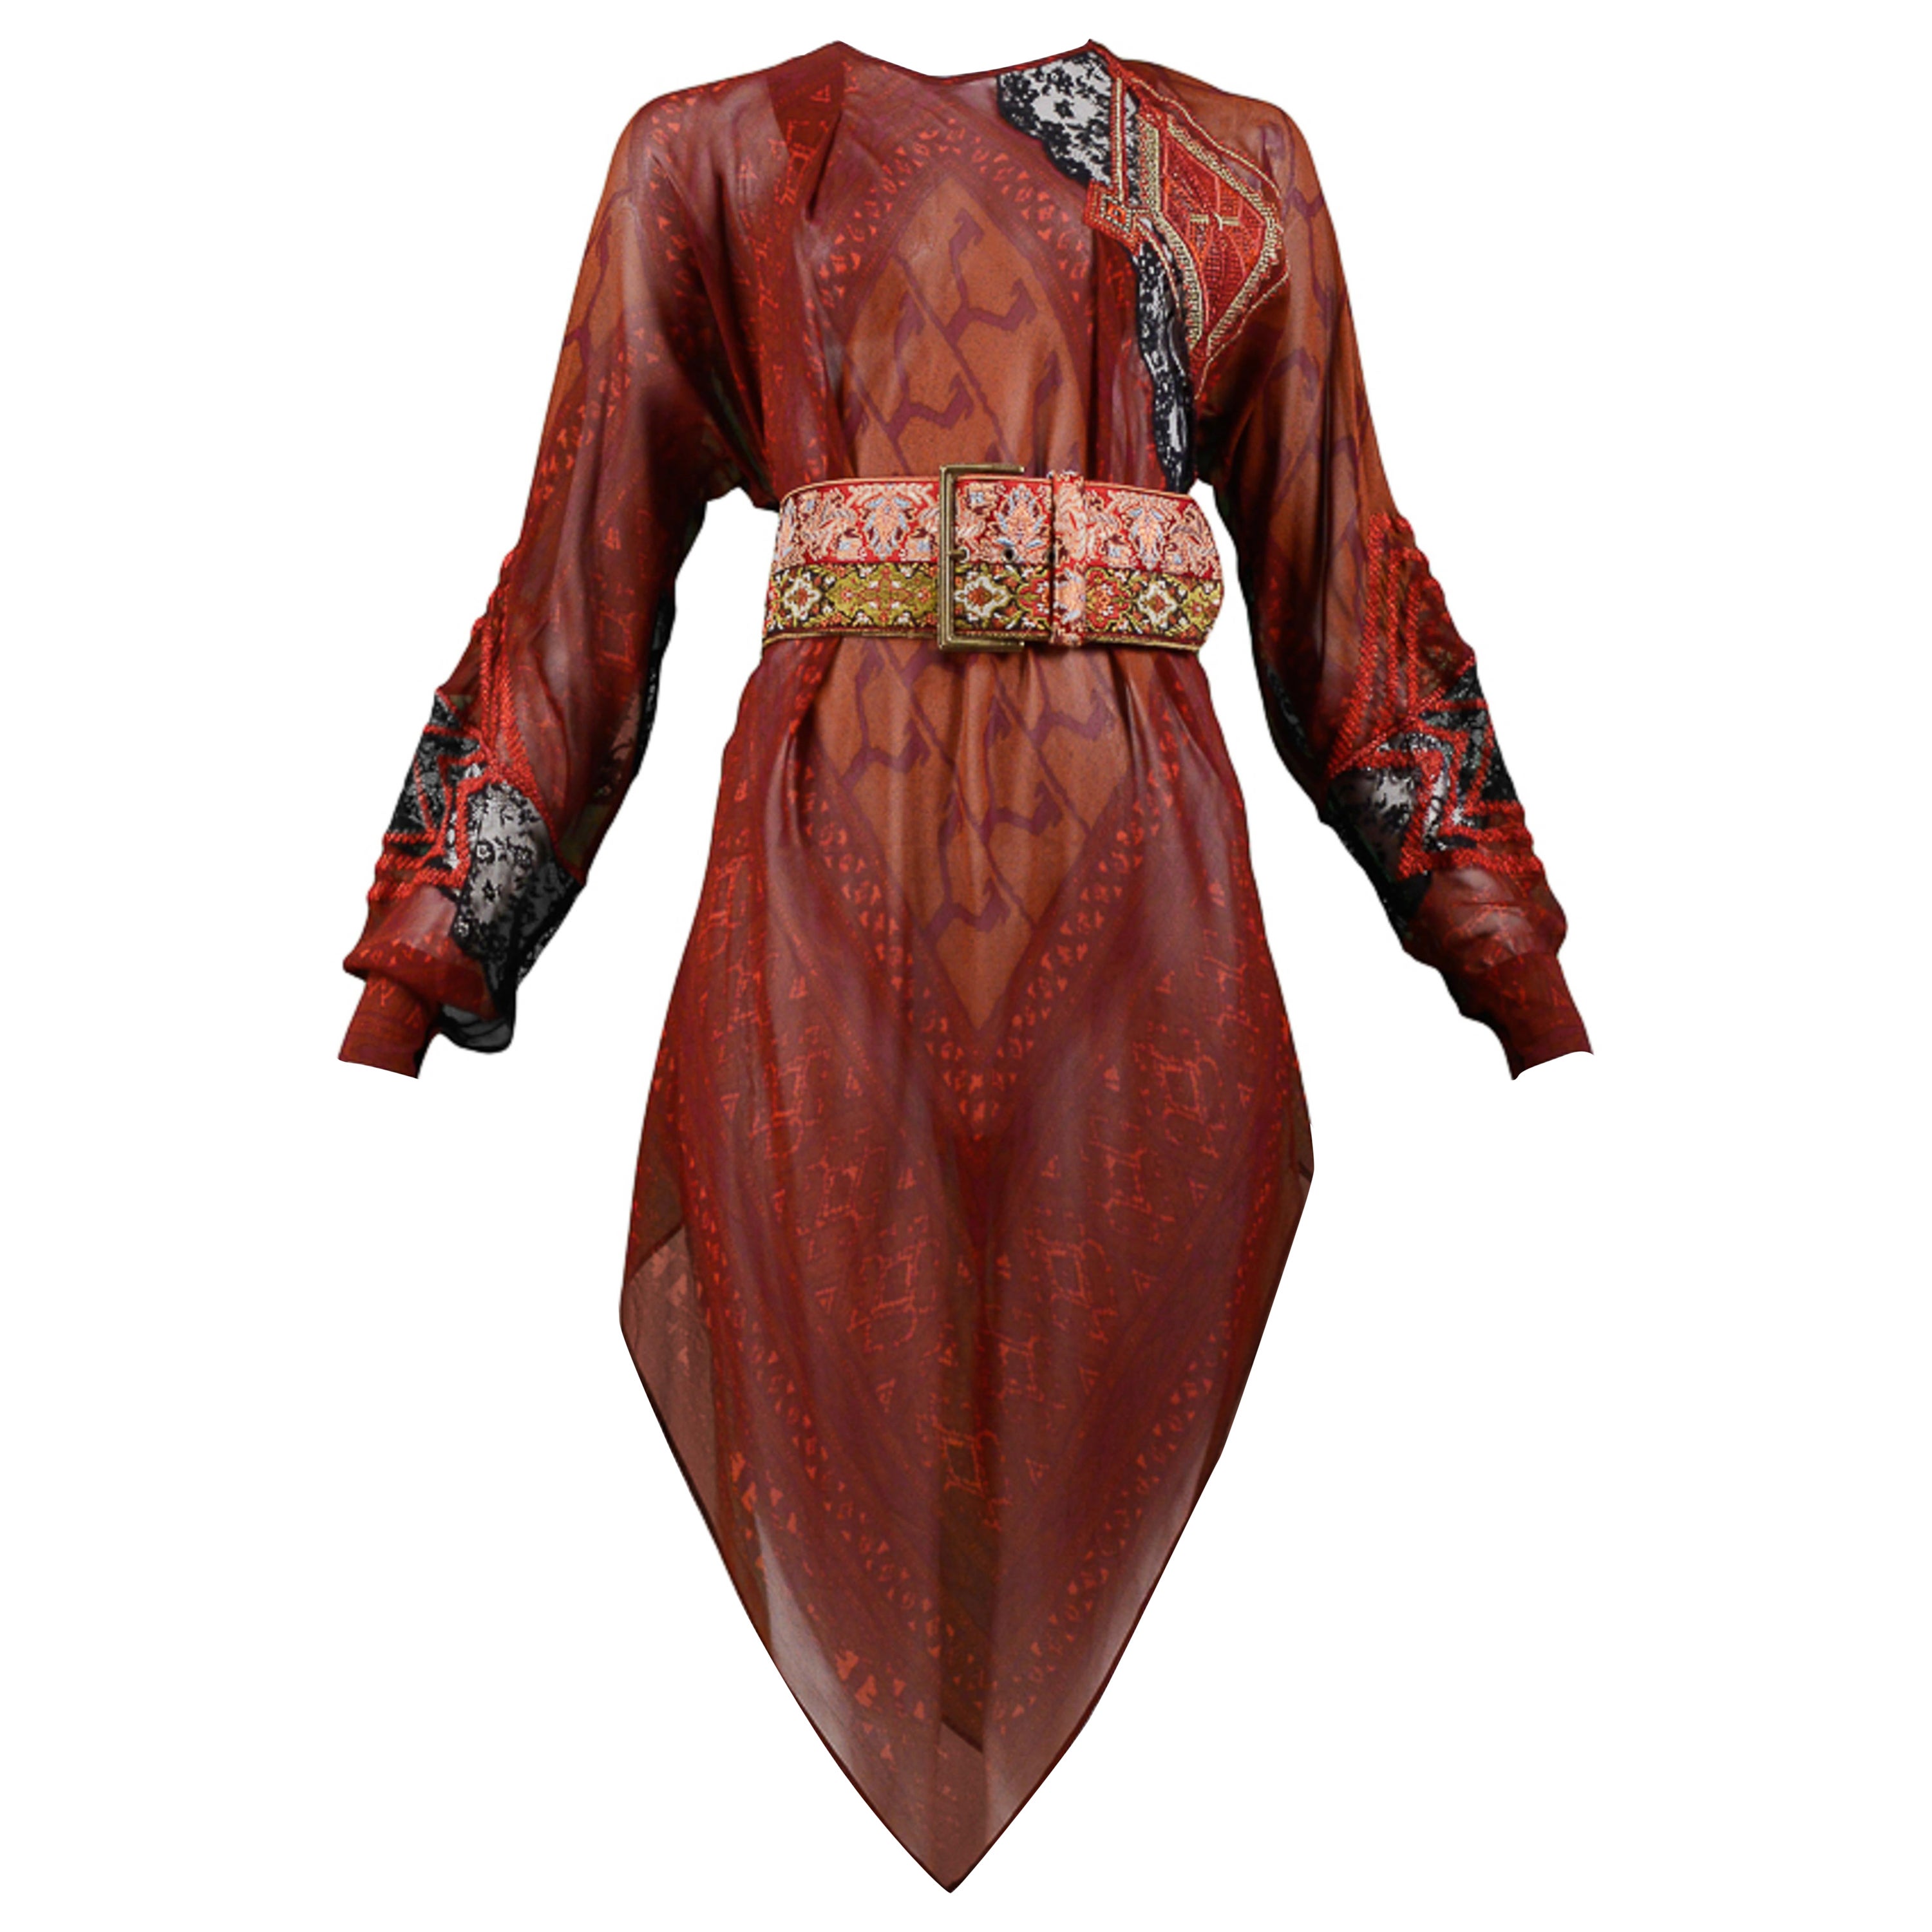 Gianfranco Ferre Burgundy Printed Tunic & Embroidered Belt For Sale